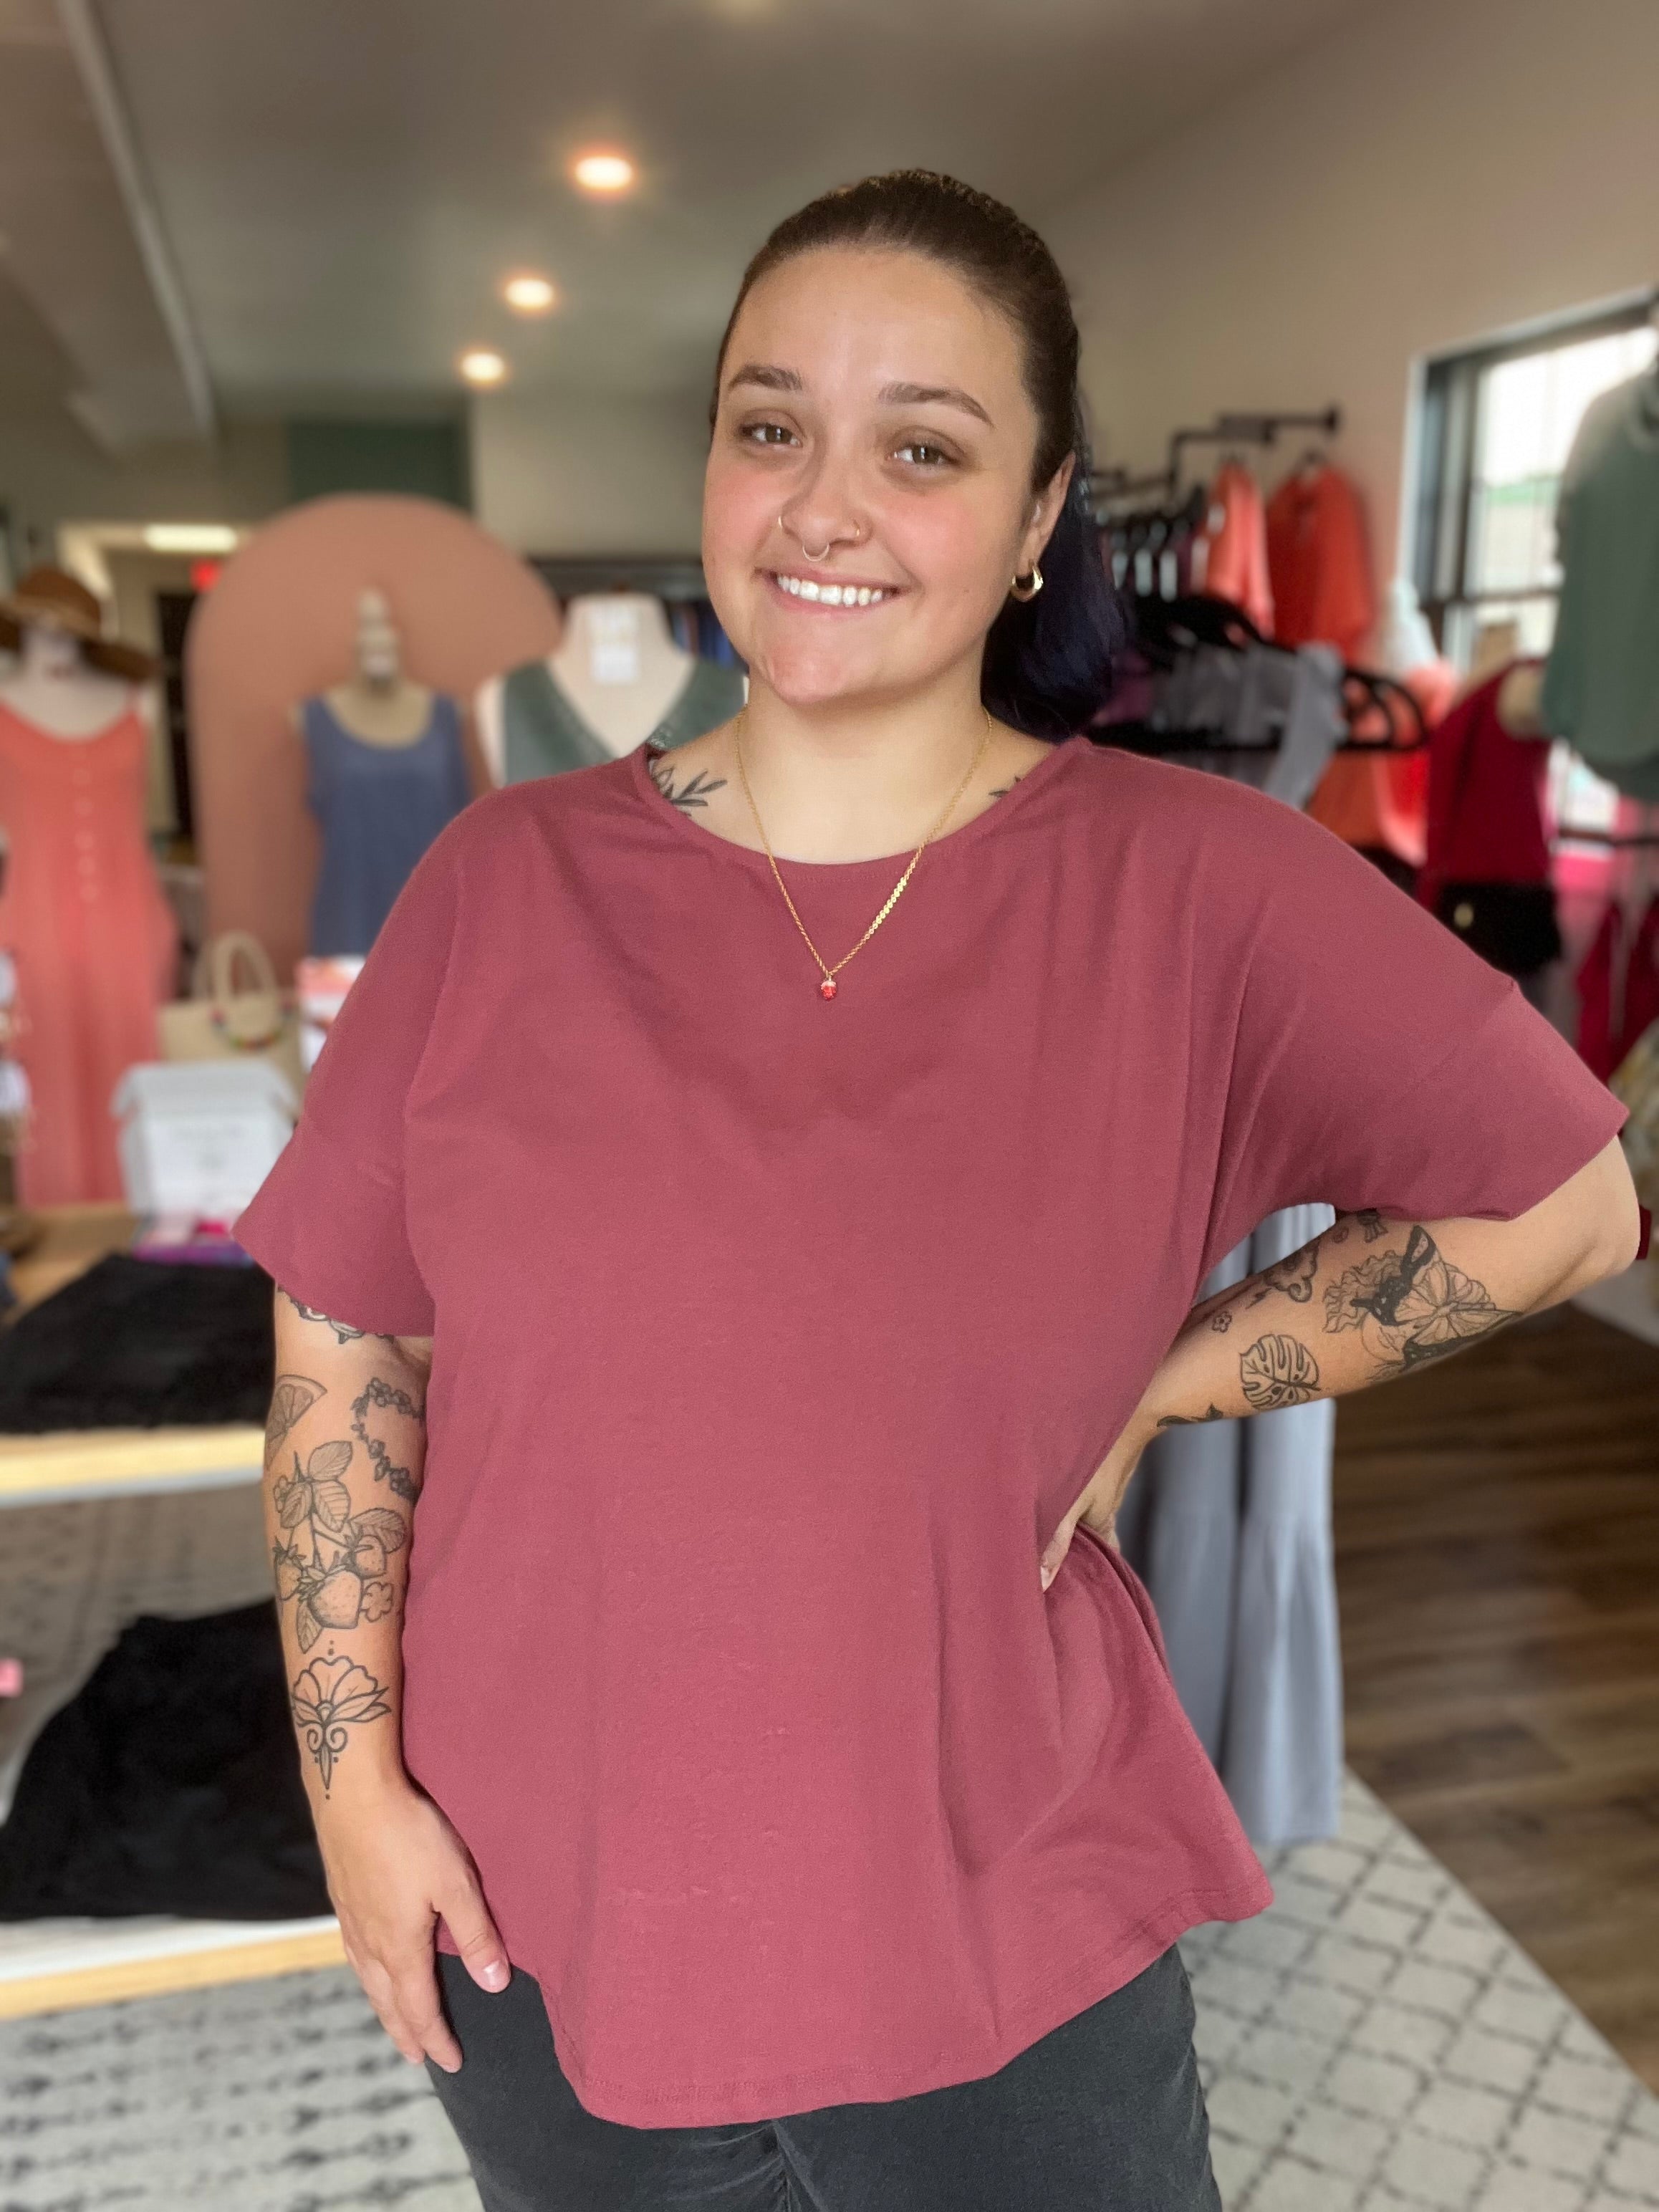 Shop Jadyah Casual Top-Shirts & Tops at Ruby Joy Boutique, a Women's Clothing Store in Pickerington, Ohio